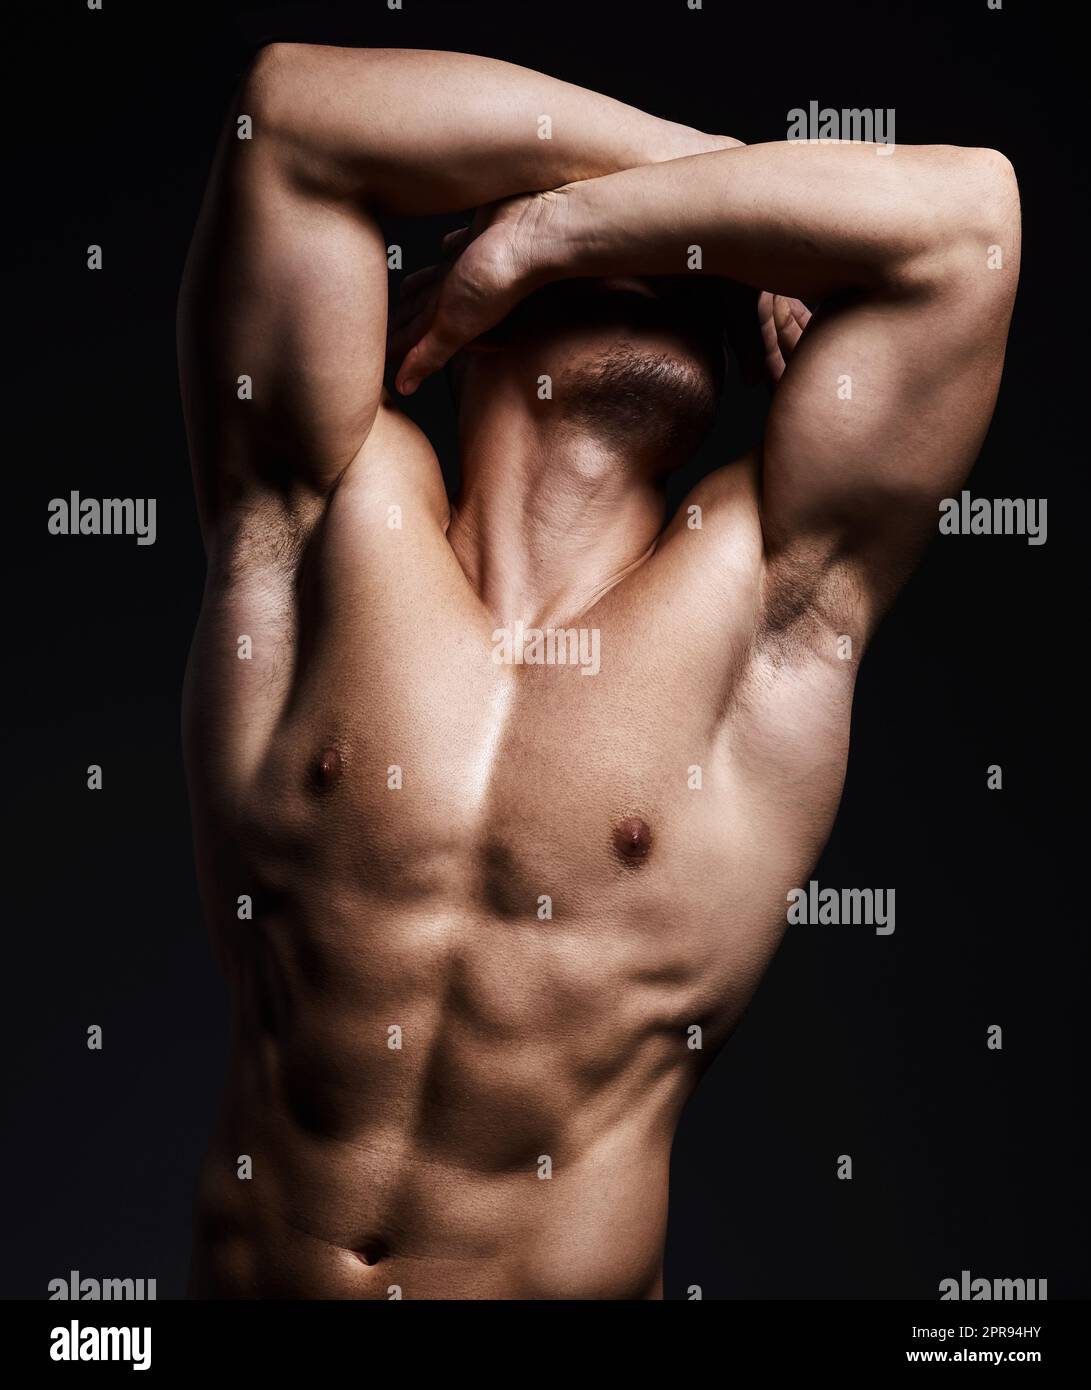 Hit the gym and do it hard. a muscular young man posing against a black background. Stock Photo